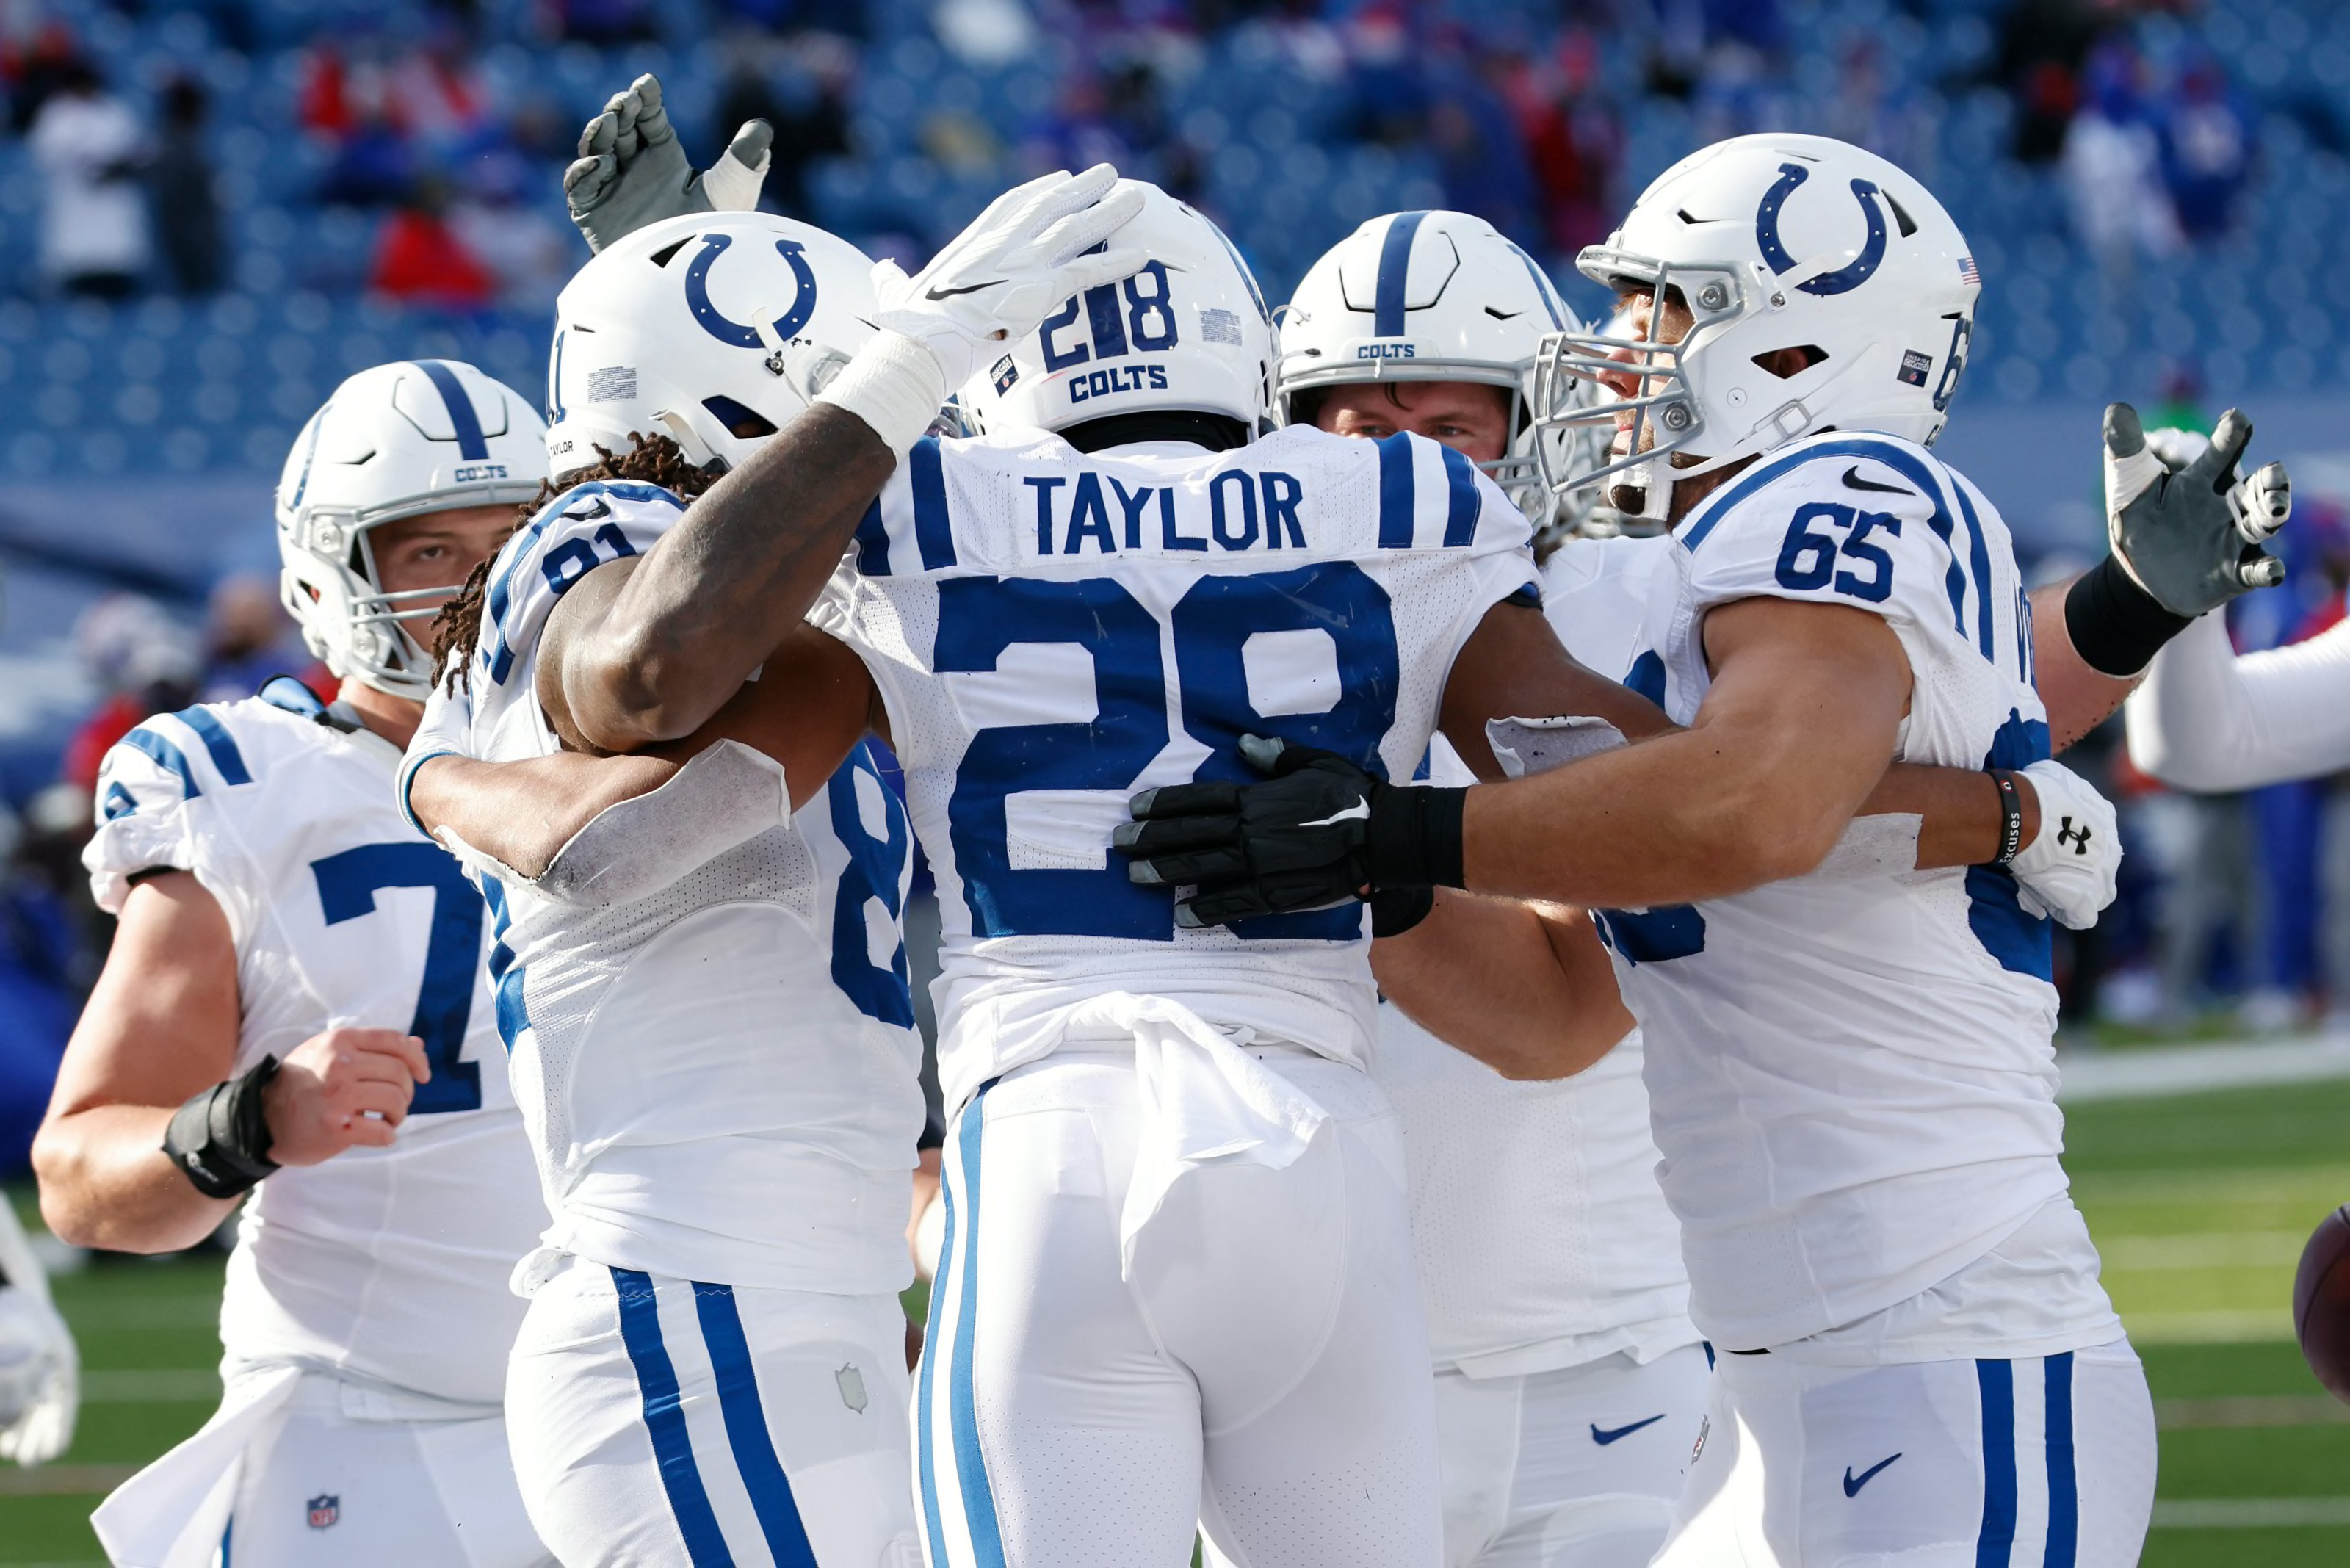 Colts: 2021 NFL Draft primer as top positional needs emerge